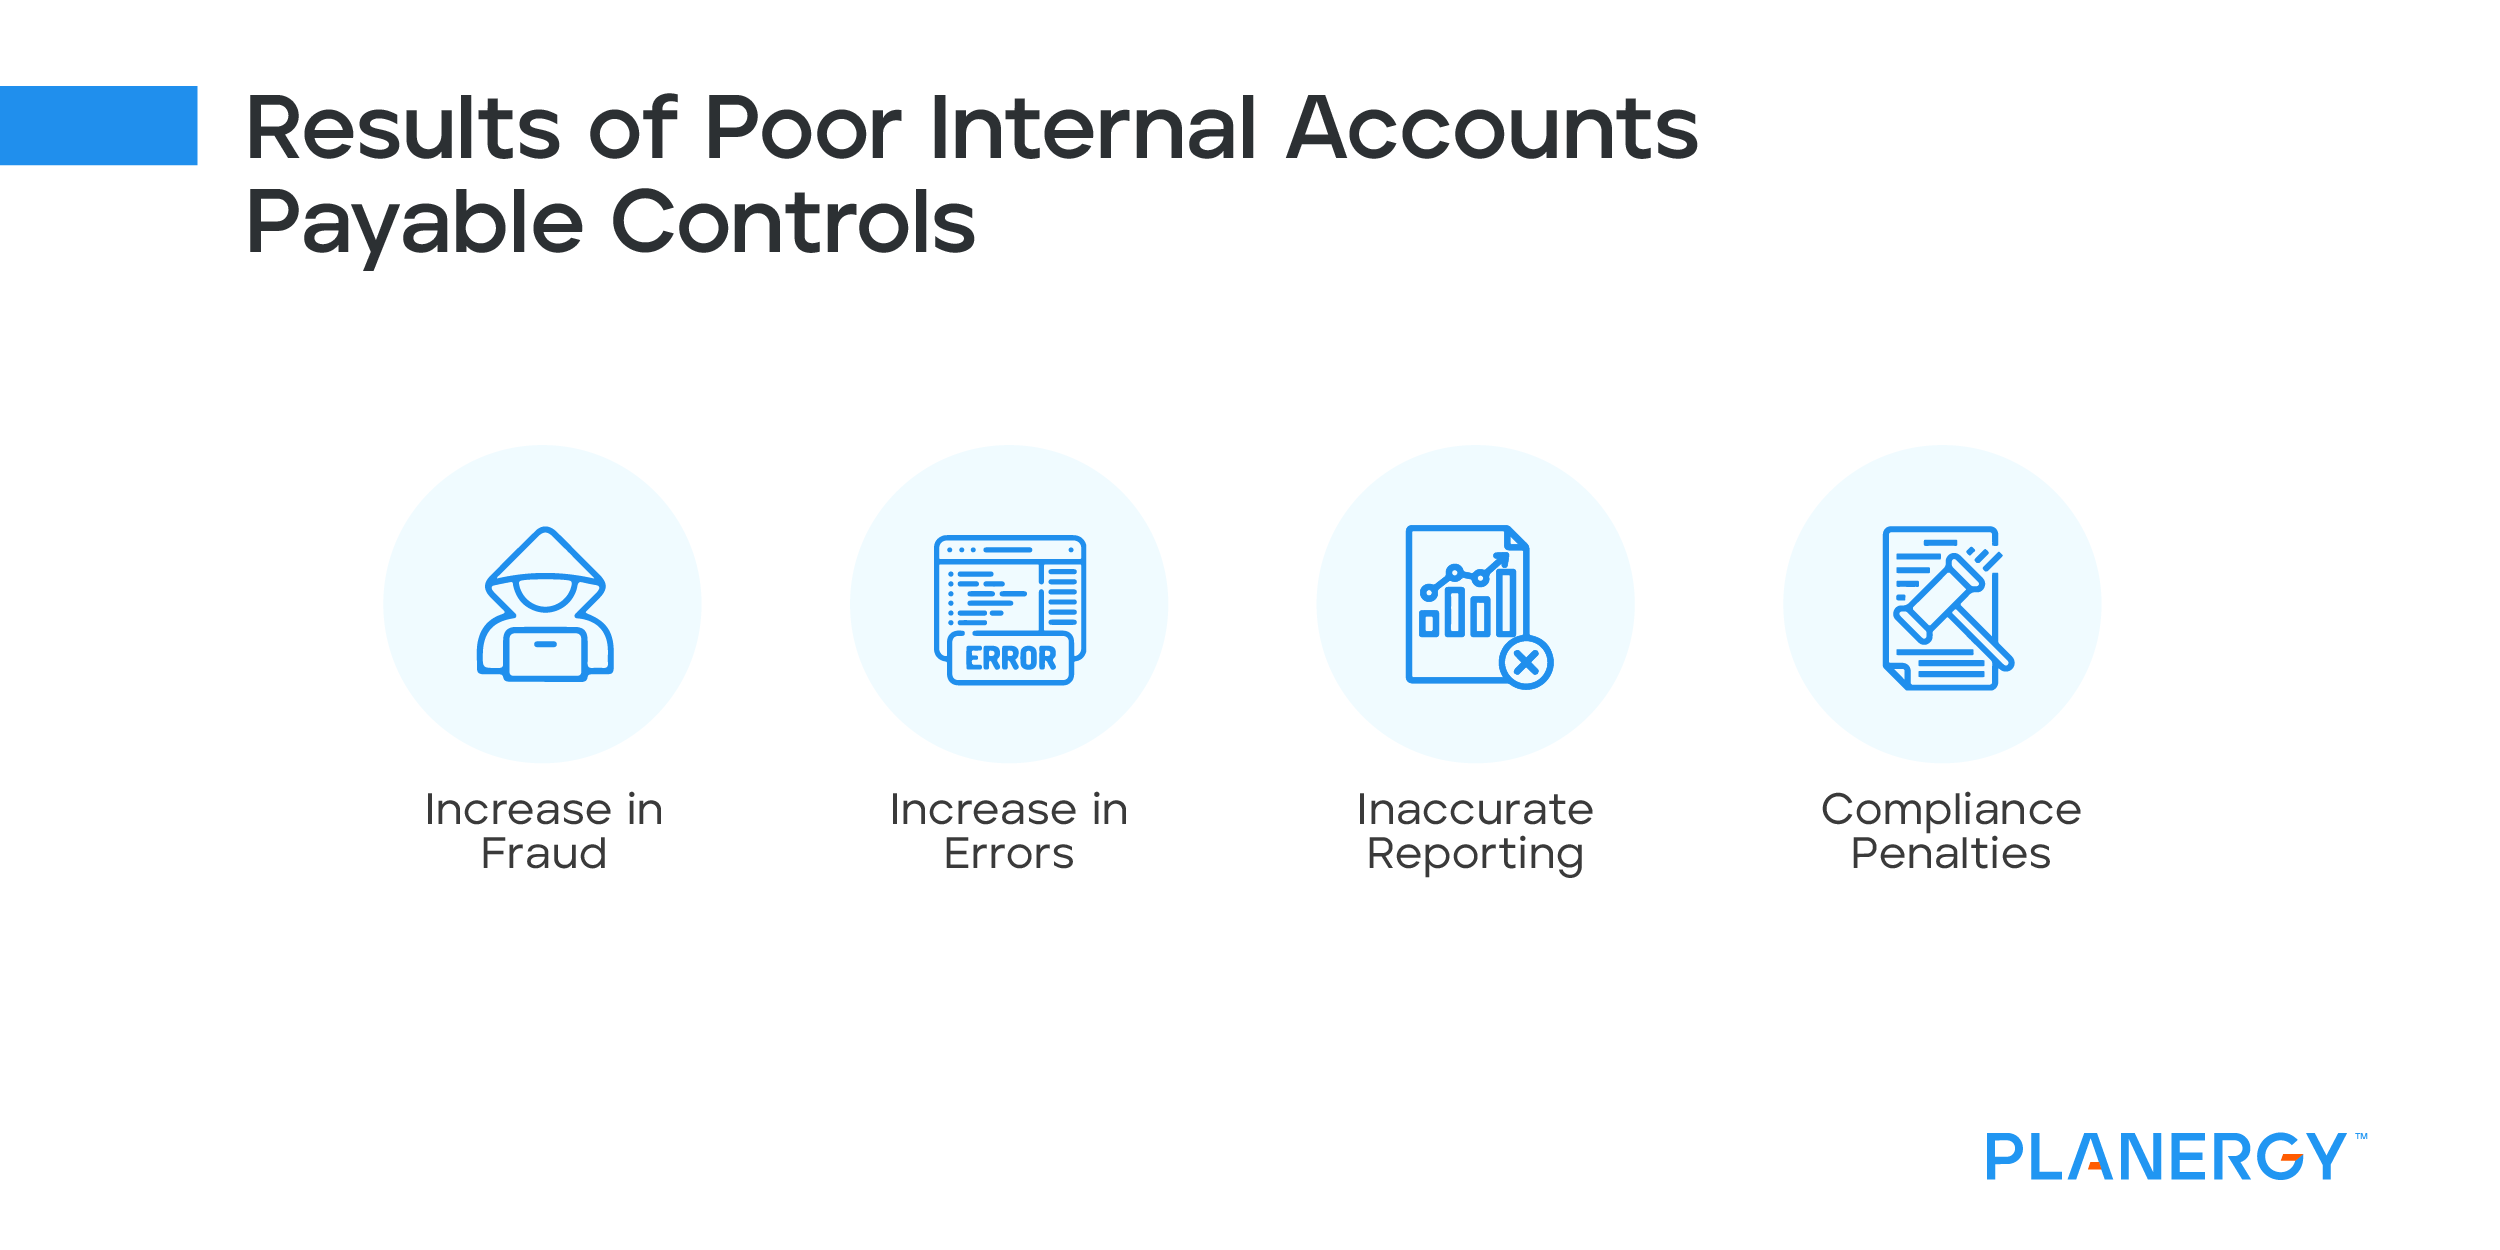 Results of Poor Internal Accounts Payable Controls